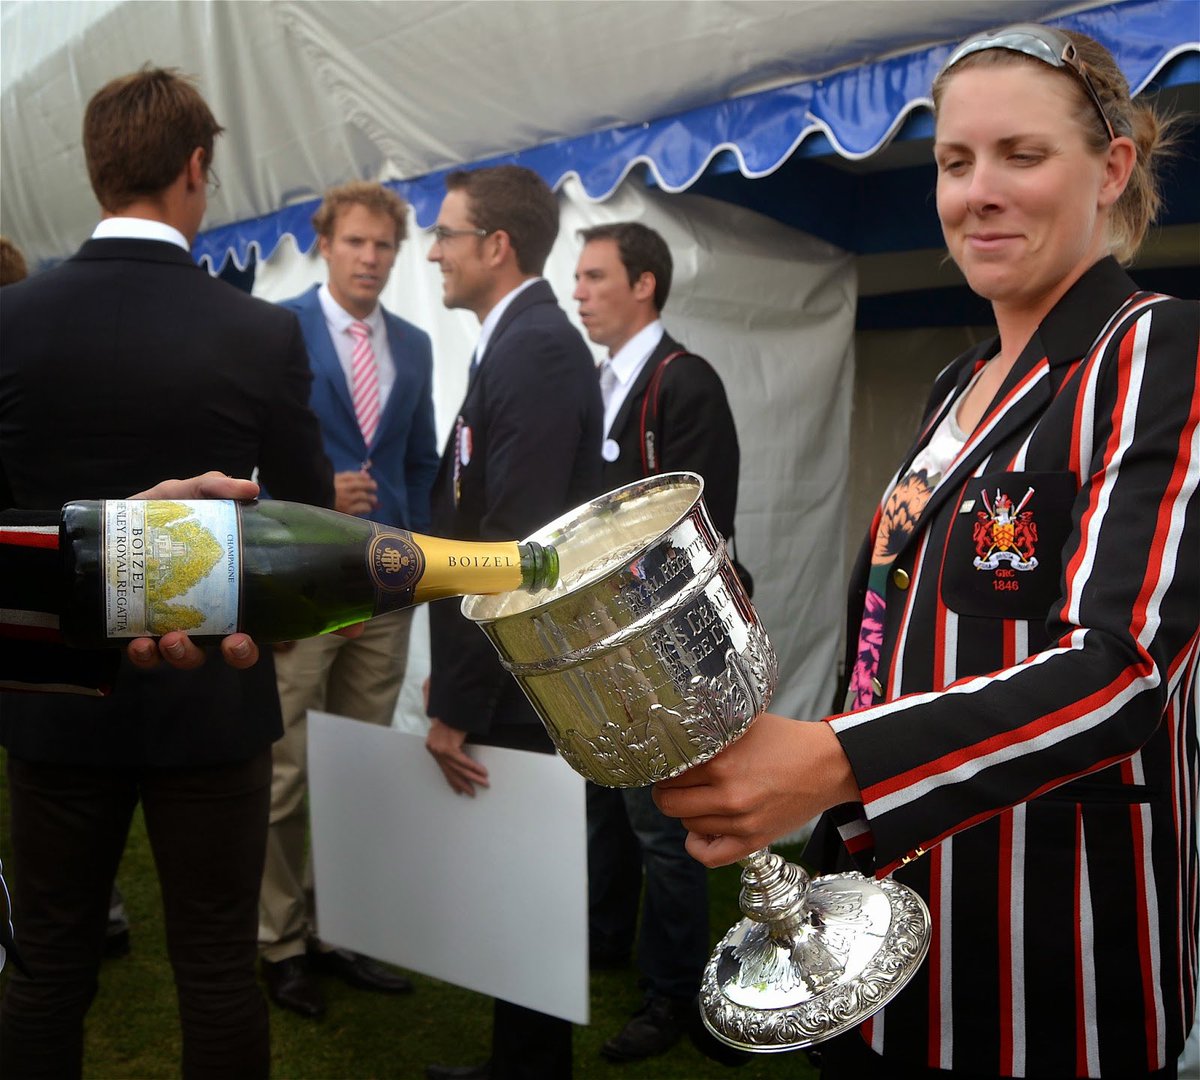 There are 59 sleeps to Henley Royal Regatta 2024. #HRR24

The eternal satisfaction of Sunday’s Champagne and silver polish cocktail ceremony..

😎

📸 Tim Koch/@boatsing